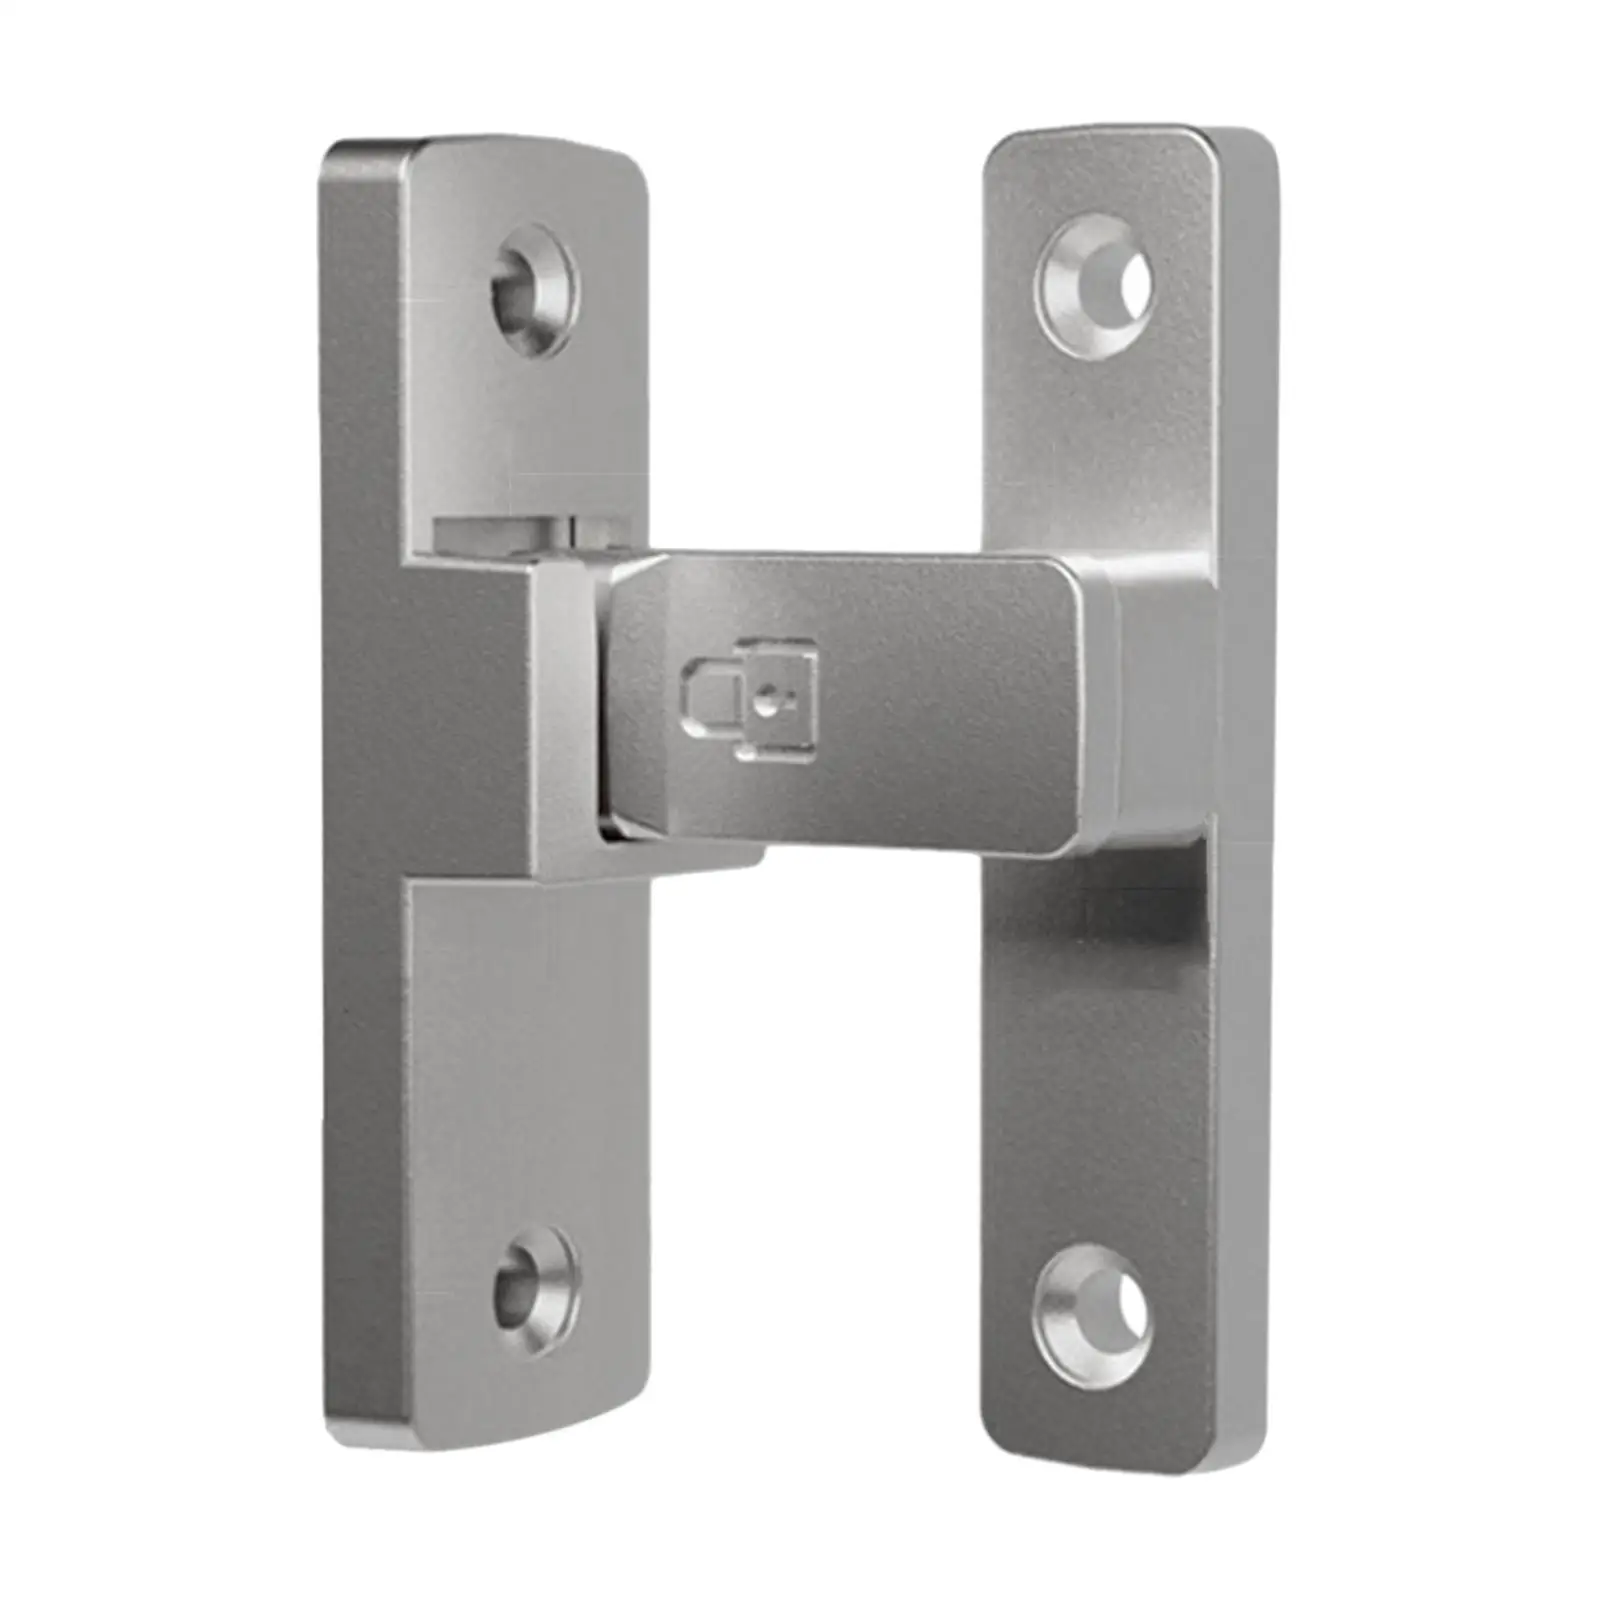 90 Degree Door Latch Guard with Screws Safety Door Lock for Hotel Cabinets